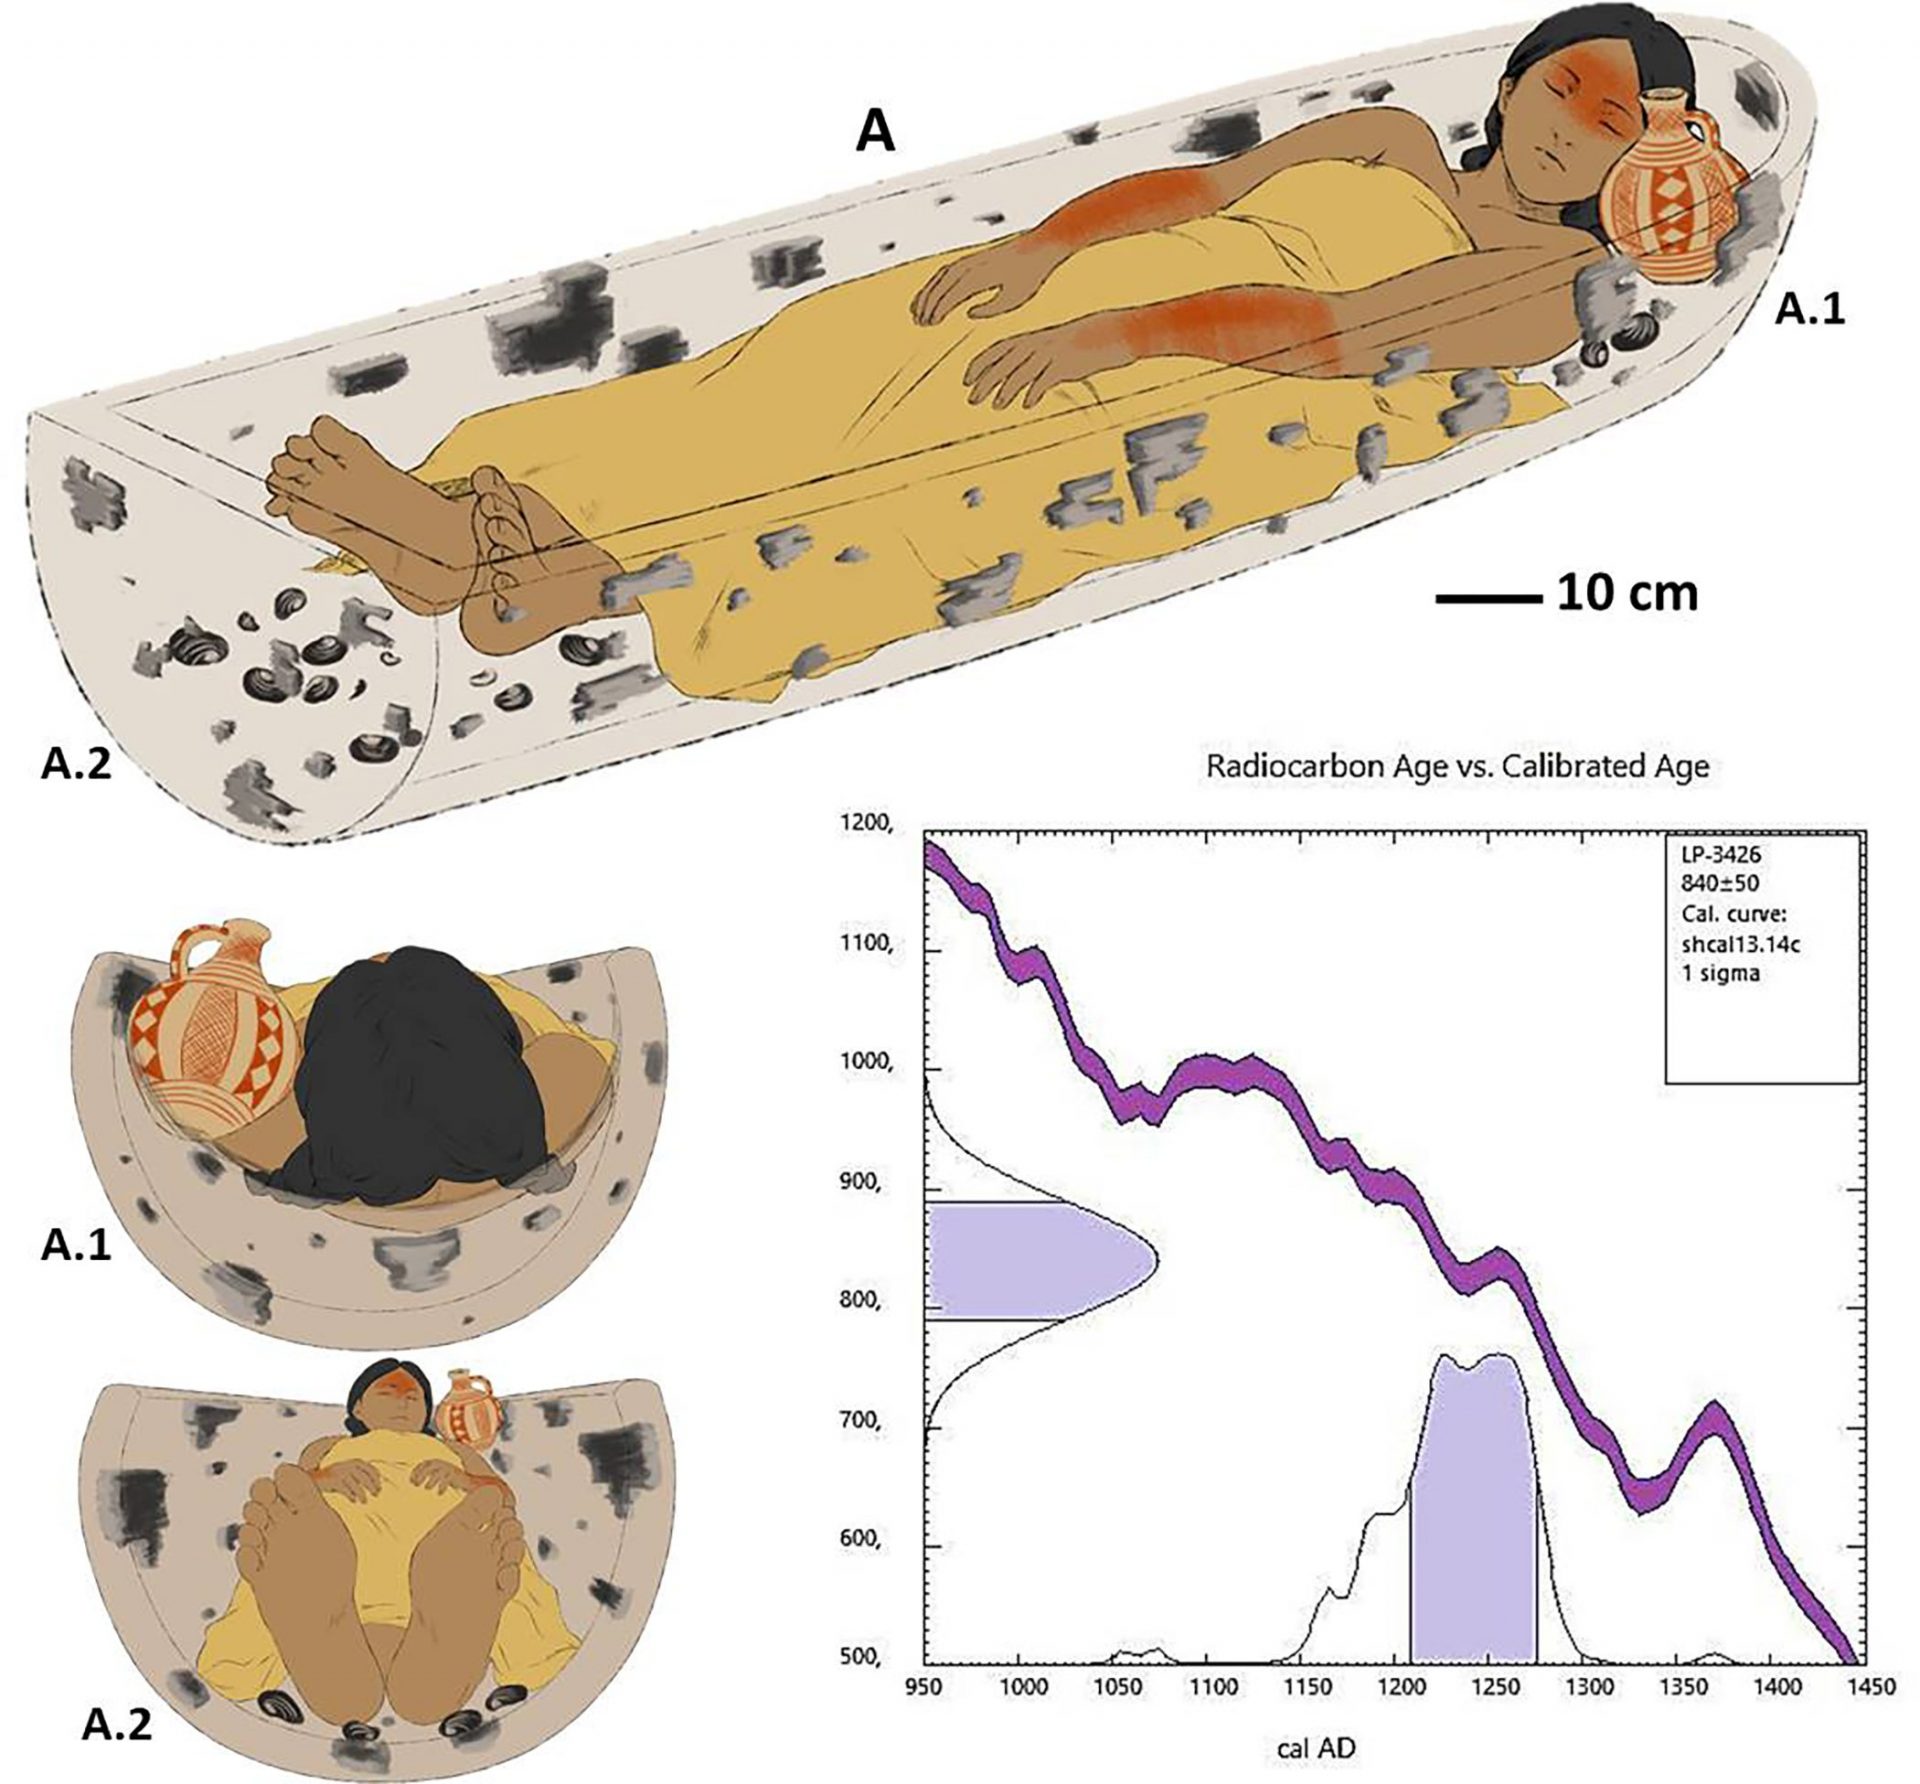 An illustration of a body placed inside a canoe, multiple angles are portrayed. A chart of radiocarbon dating of the body is also shown.